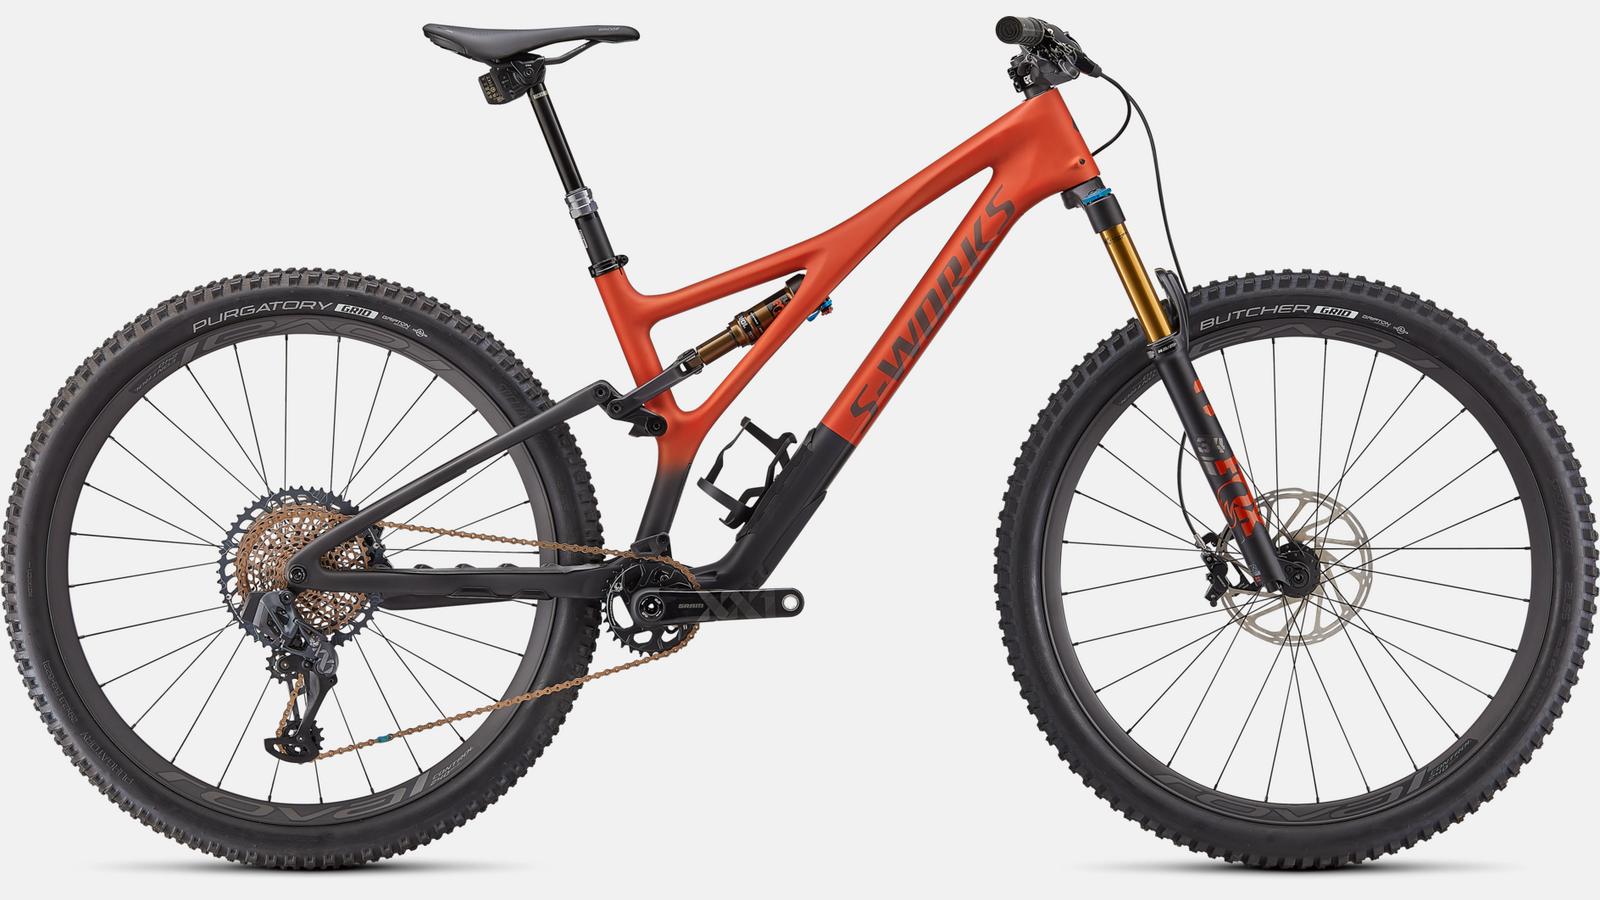 Paint for 2021 Specialized S-Works Stumpjumper - Satin Redwood